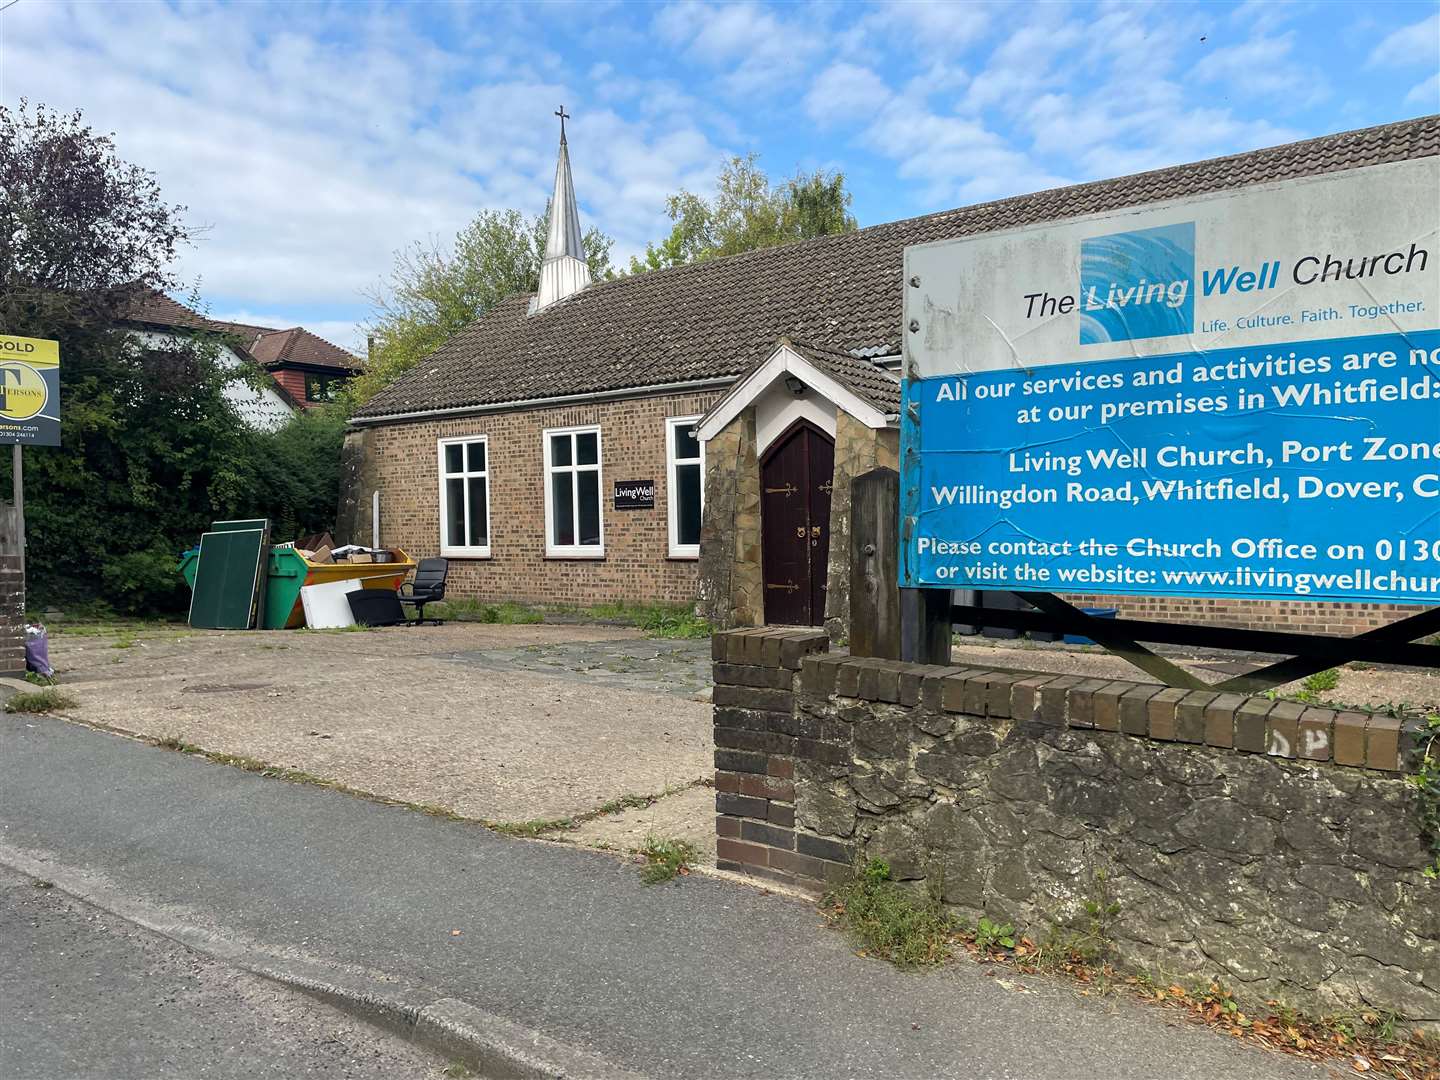 Emergency services were called to the former Living Well Church on Saturday morning